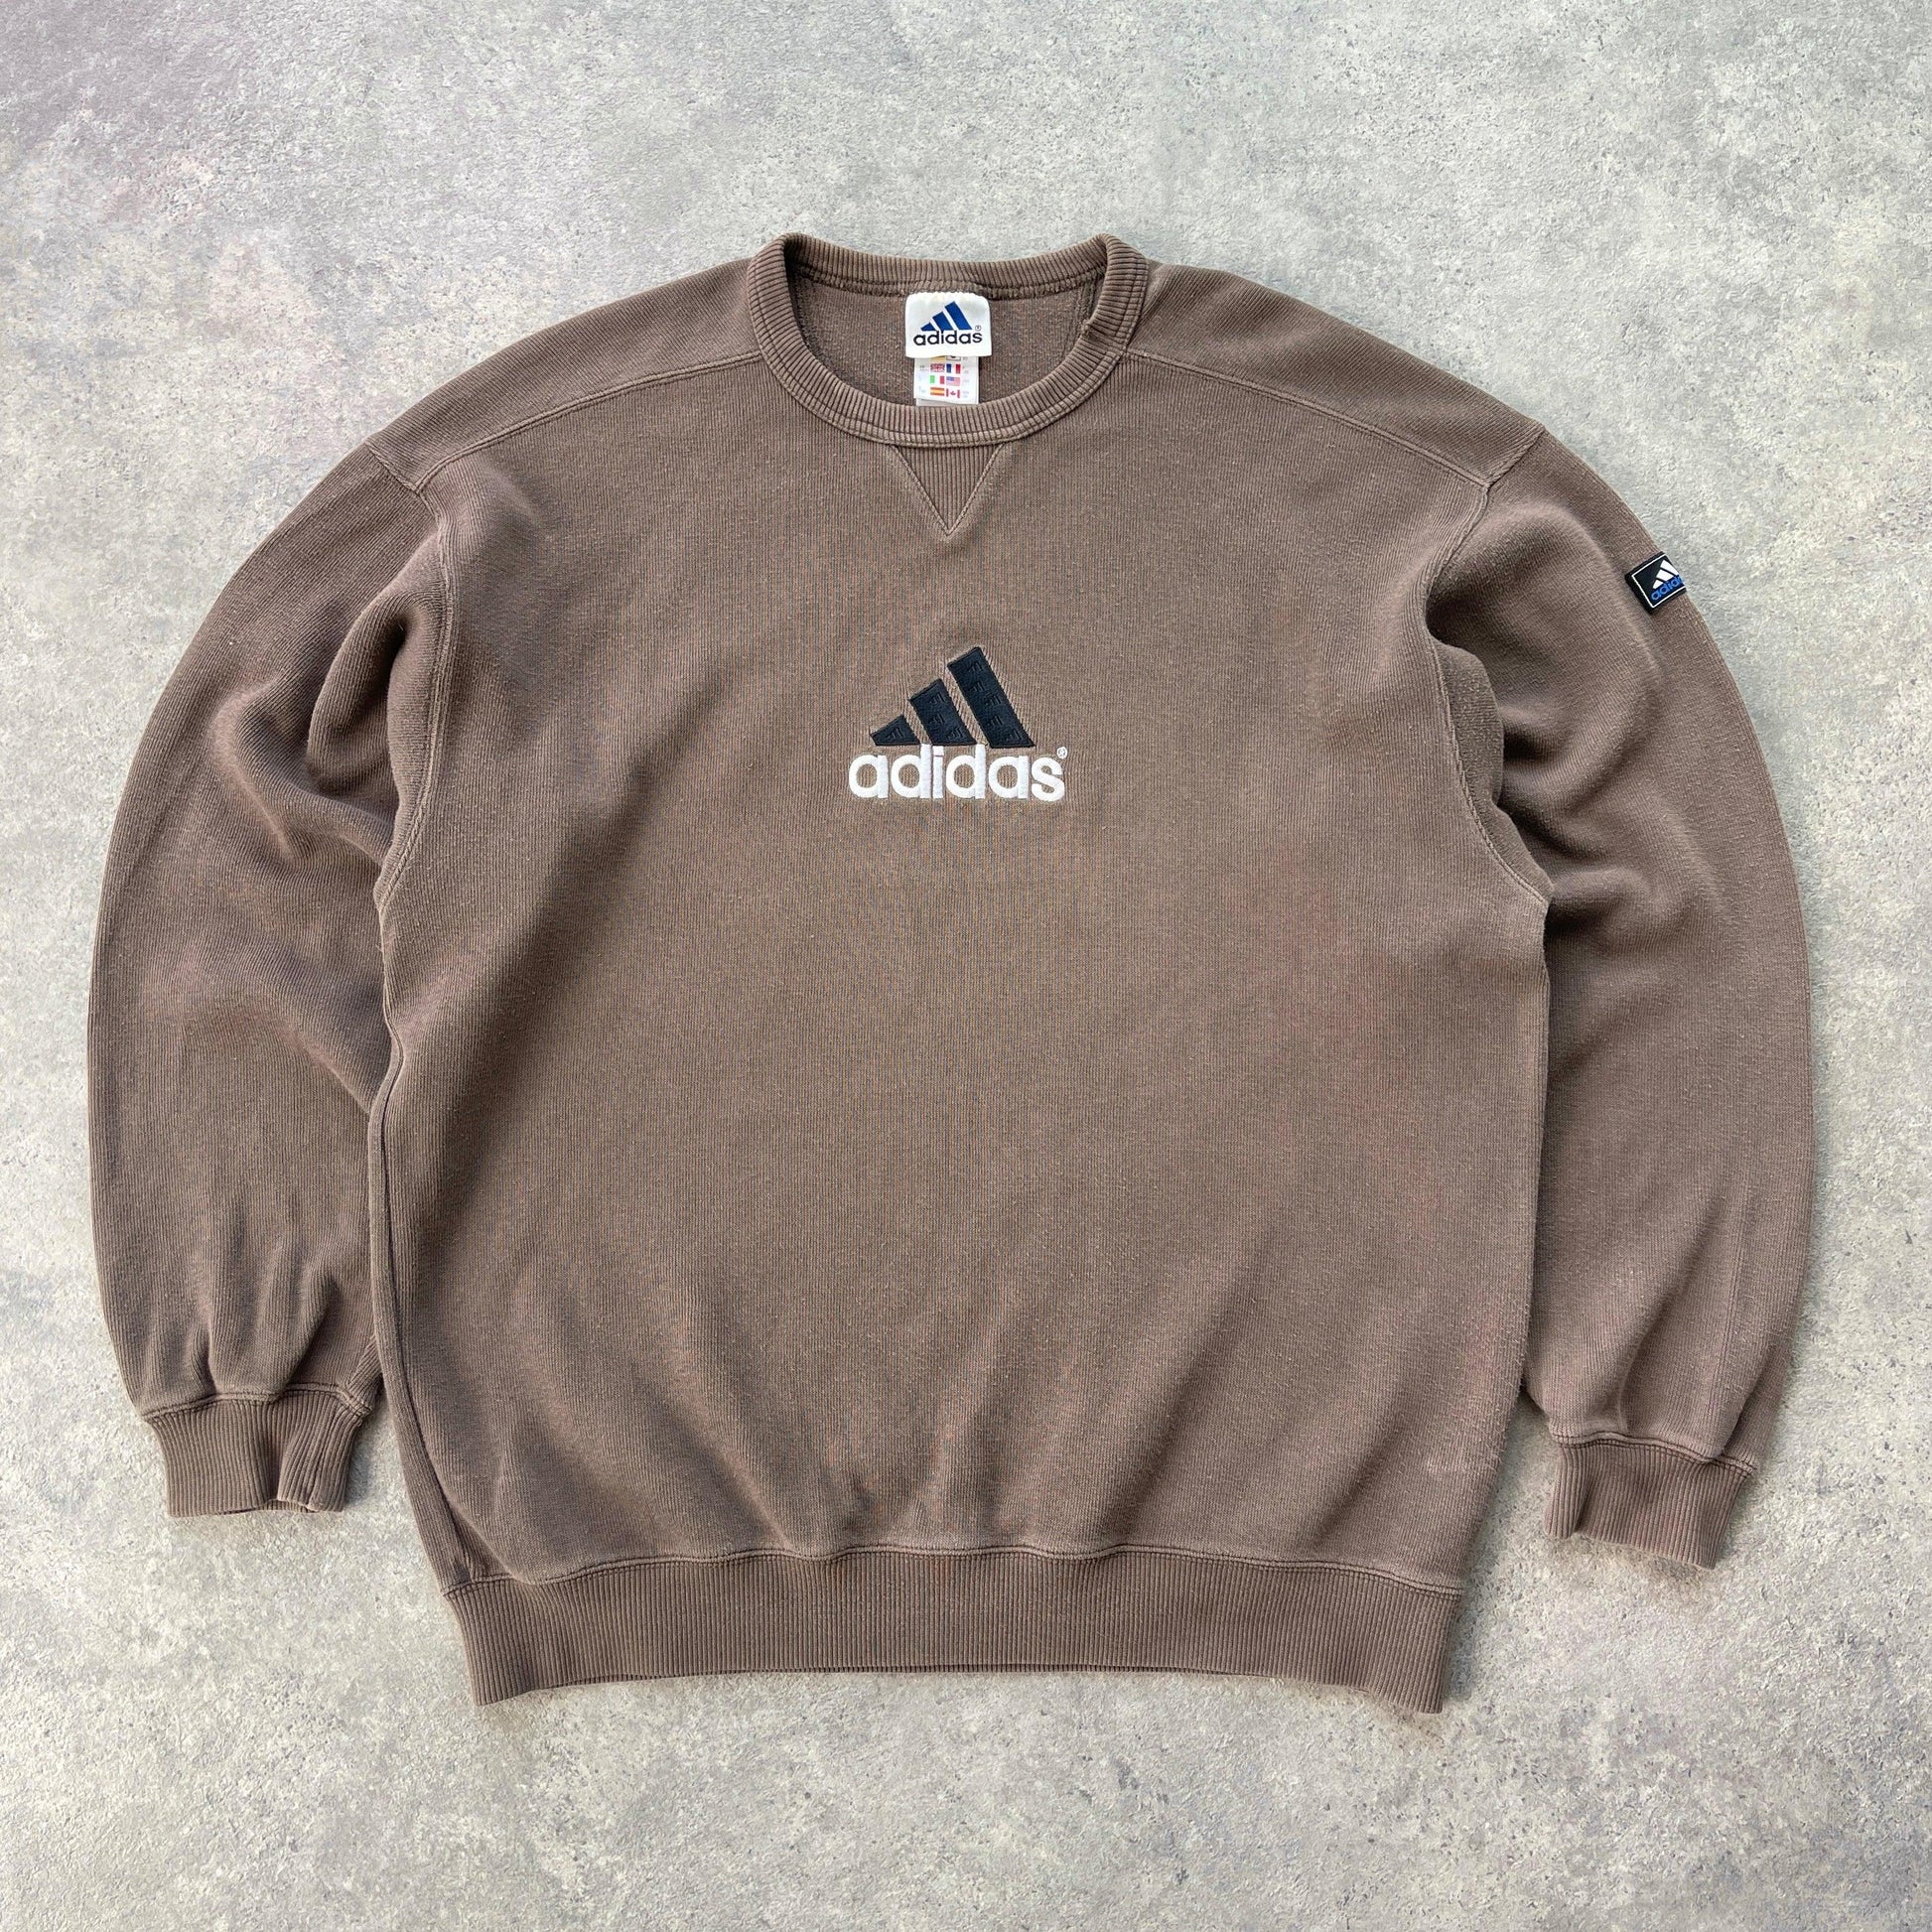 Adidas 1990s heavyweight embroidered ribbed sweatshirt (L) - Known Source